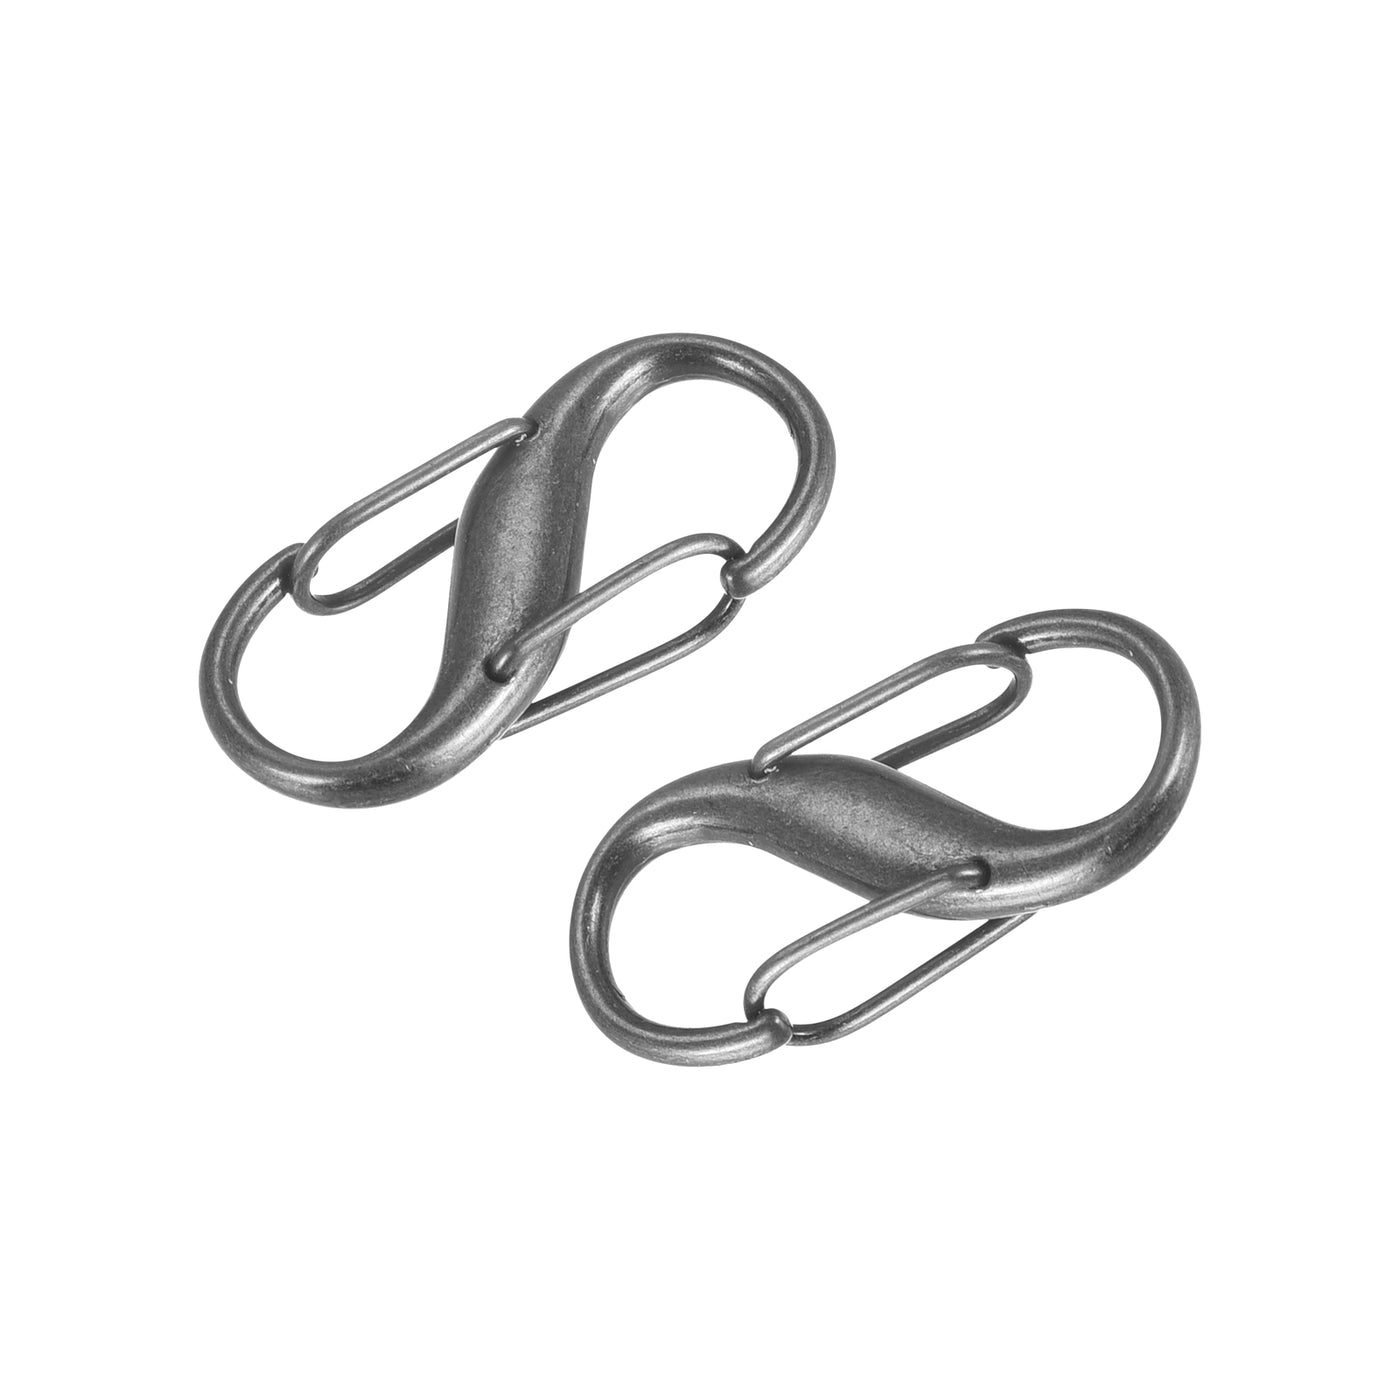 uxcell Uxcell Adjustable Metal Buckle for Chain Strap, 8Pcs 27x13mm Chain Shortener, Grey